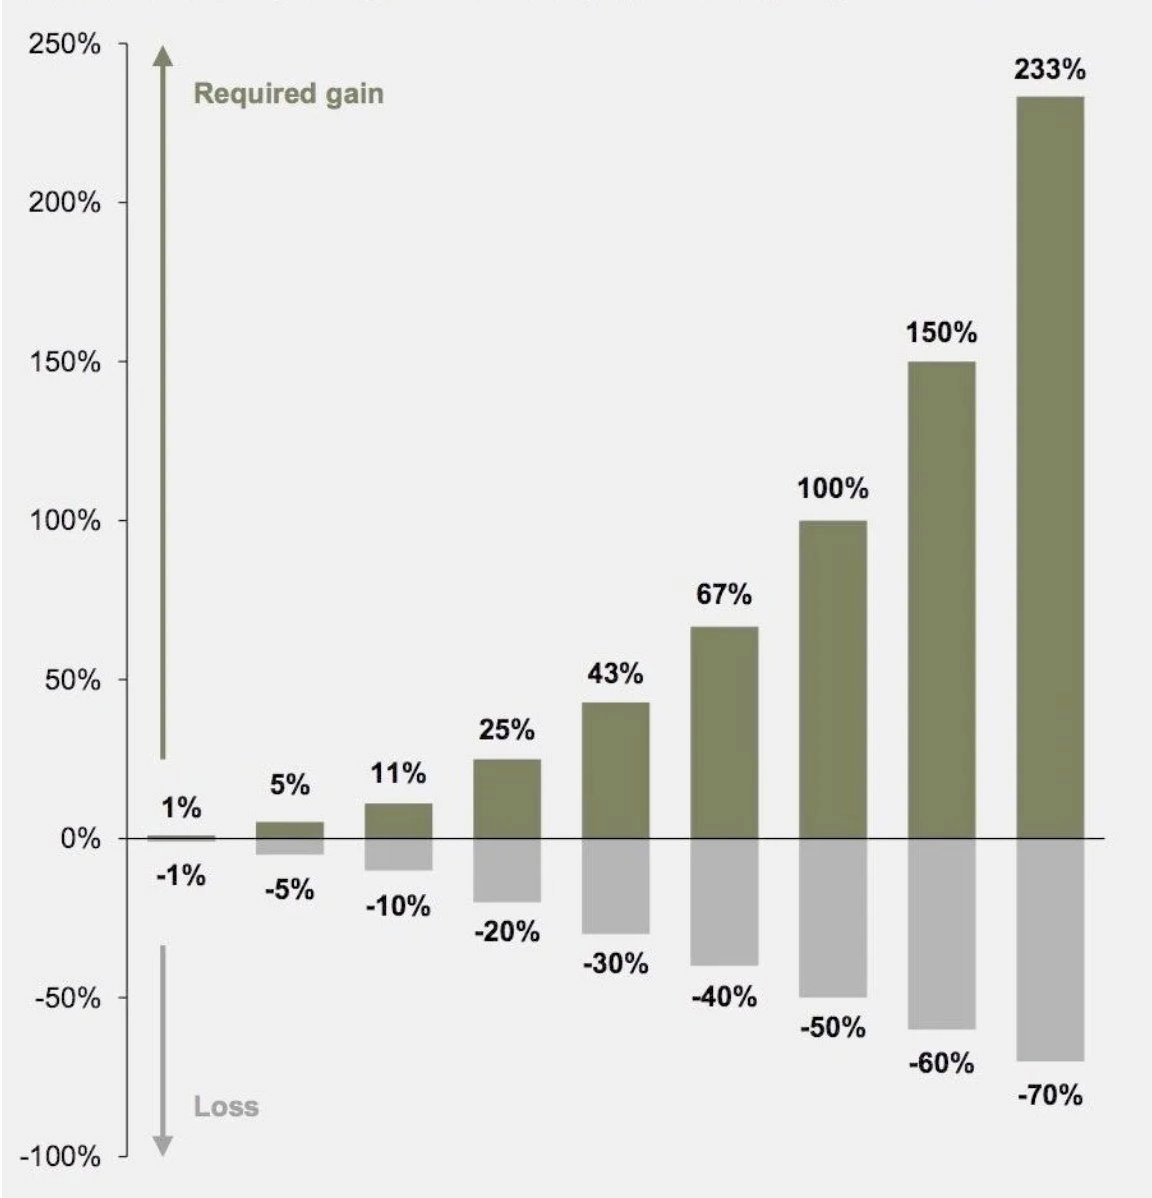 6. Percentage gains needed to recover from loss: